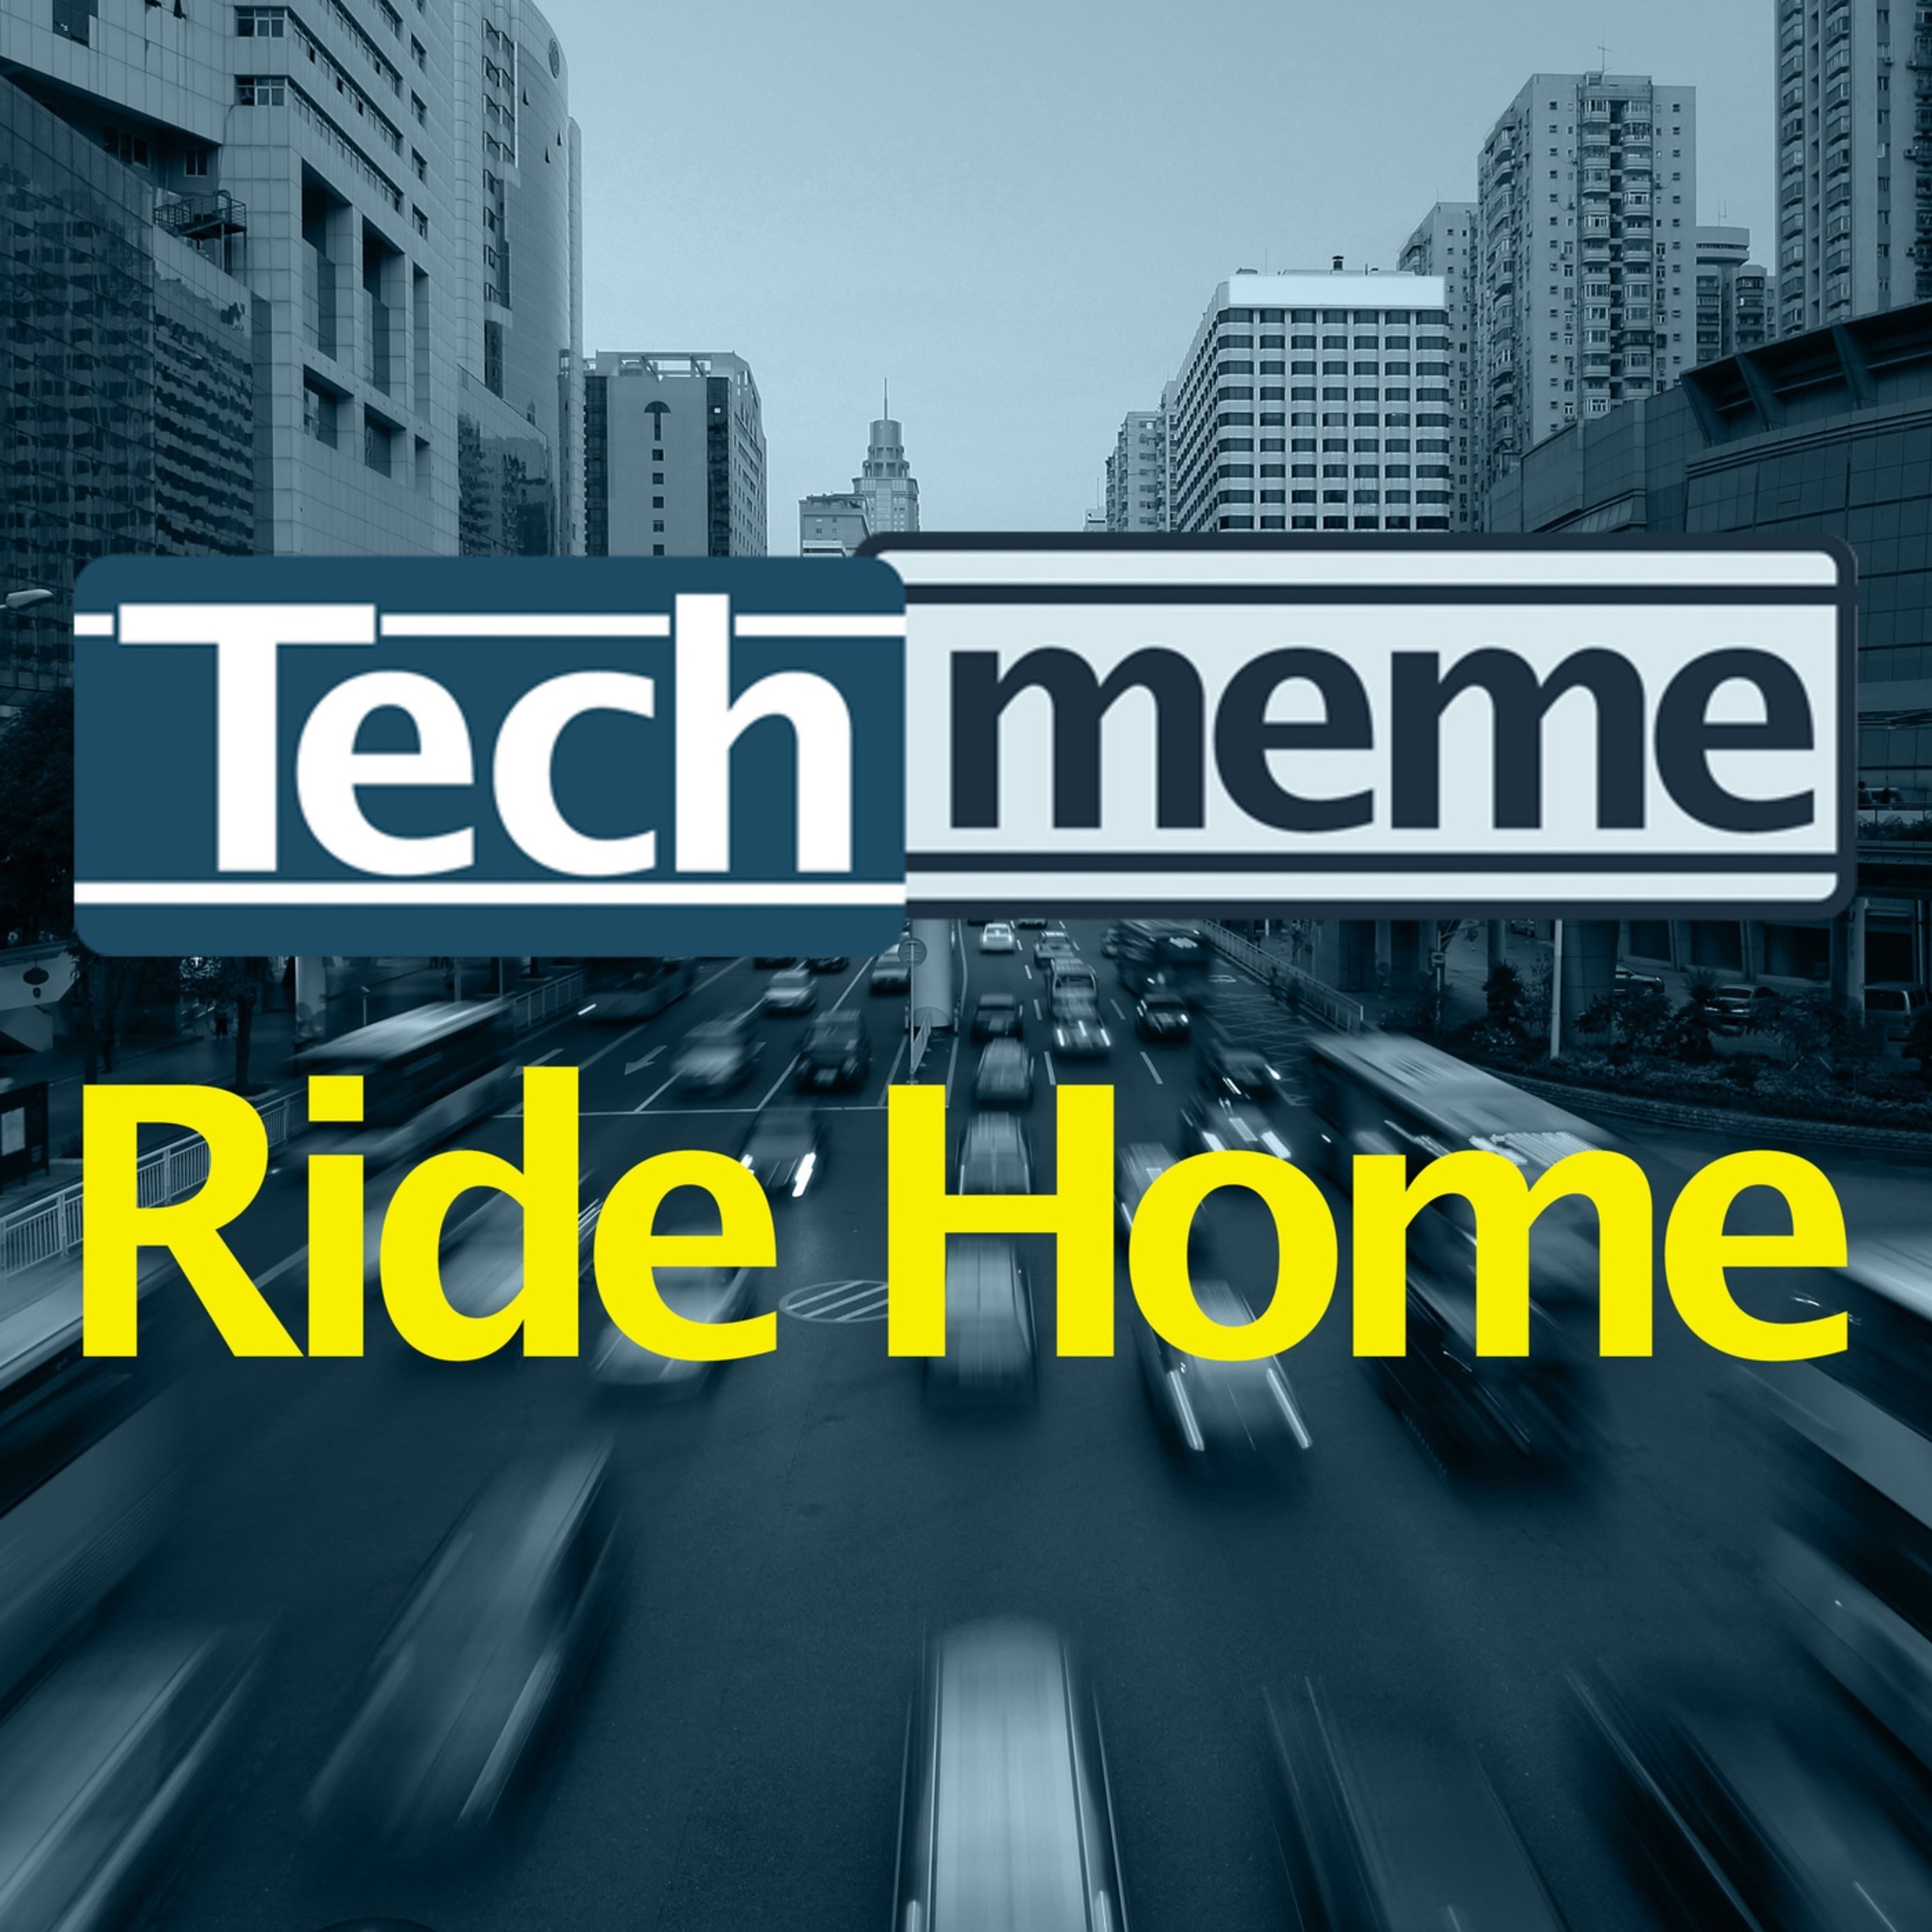 Techmeme Ride Home - a16z’s Future Plans And Audio Spaces With @smc90 and @kyurieff